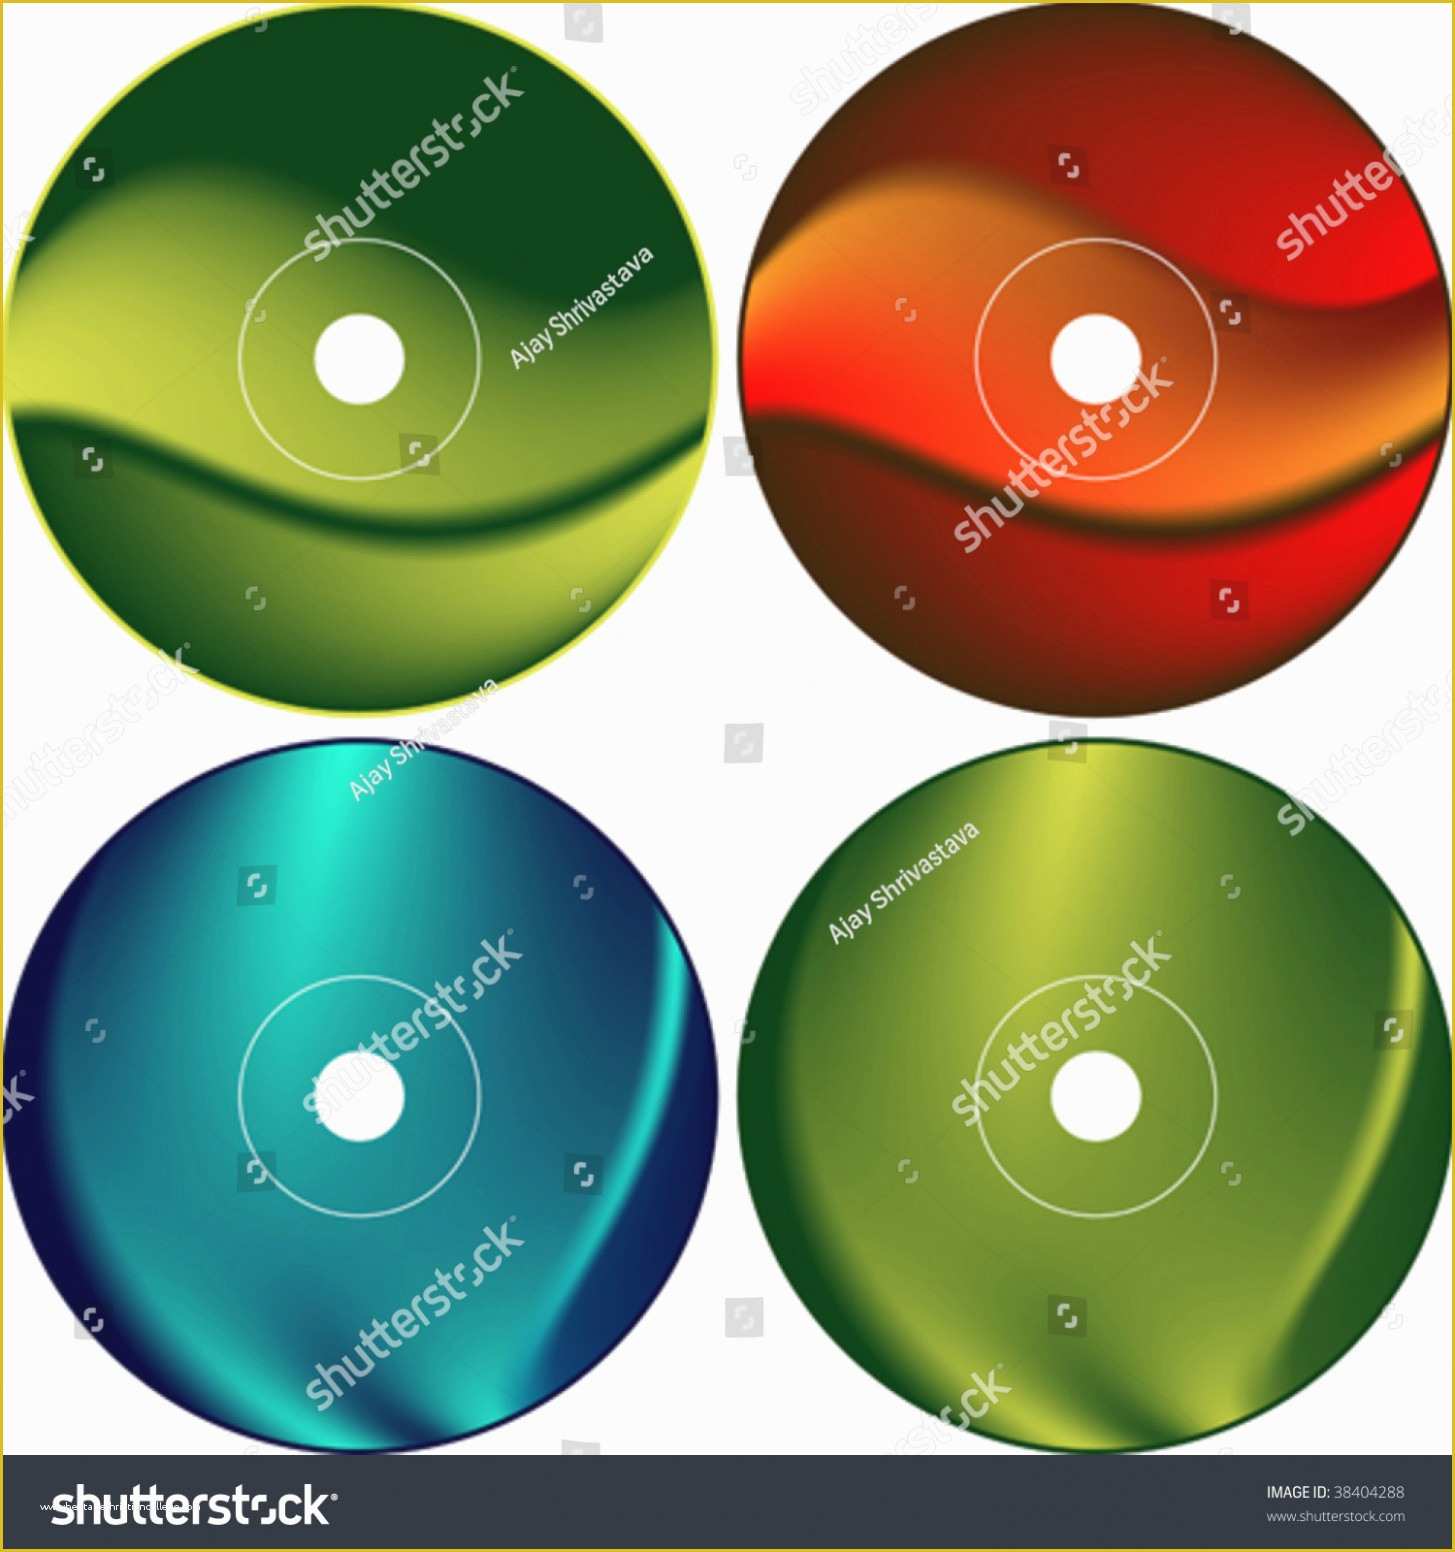 Free Cd Label Template Of How Dvd Label Design Free is